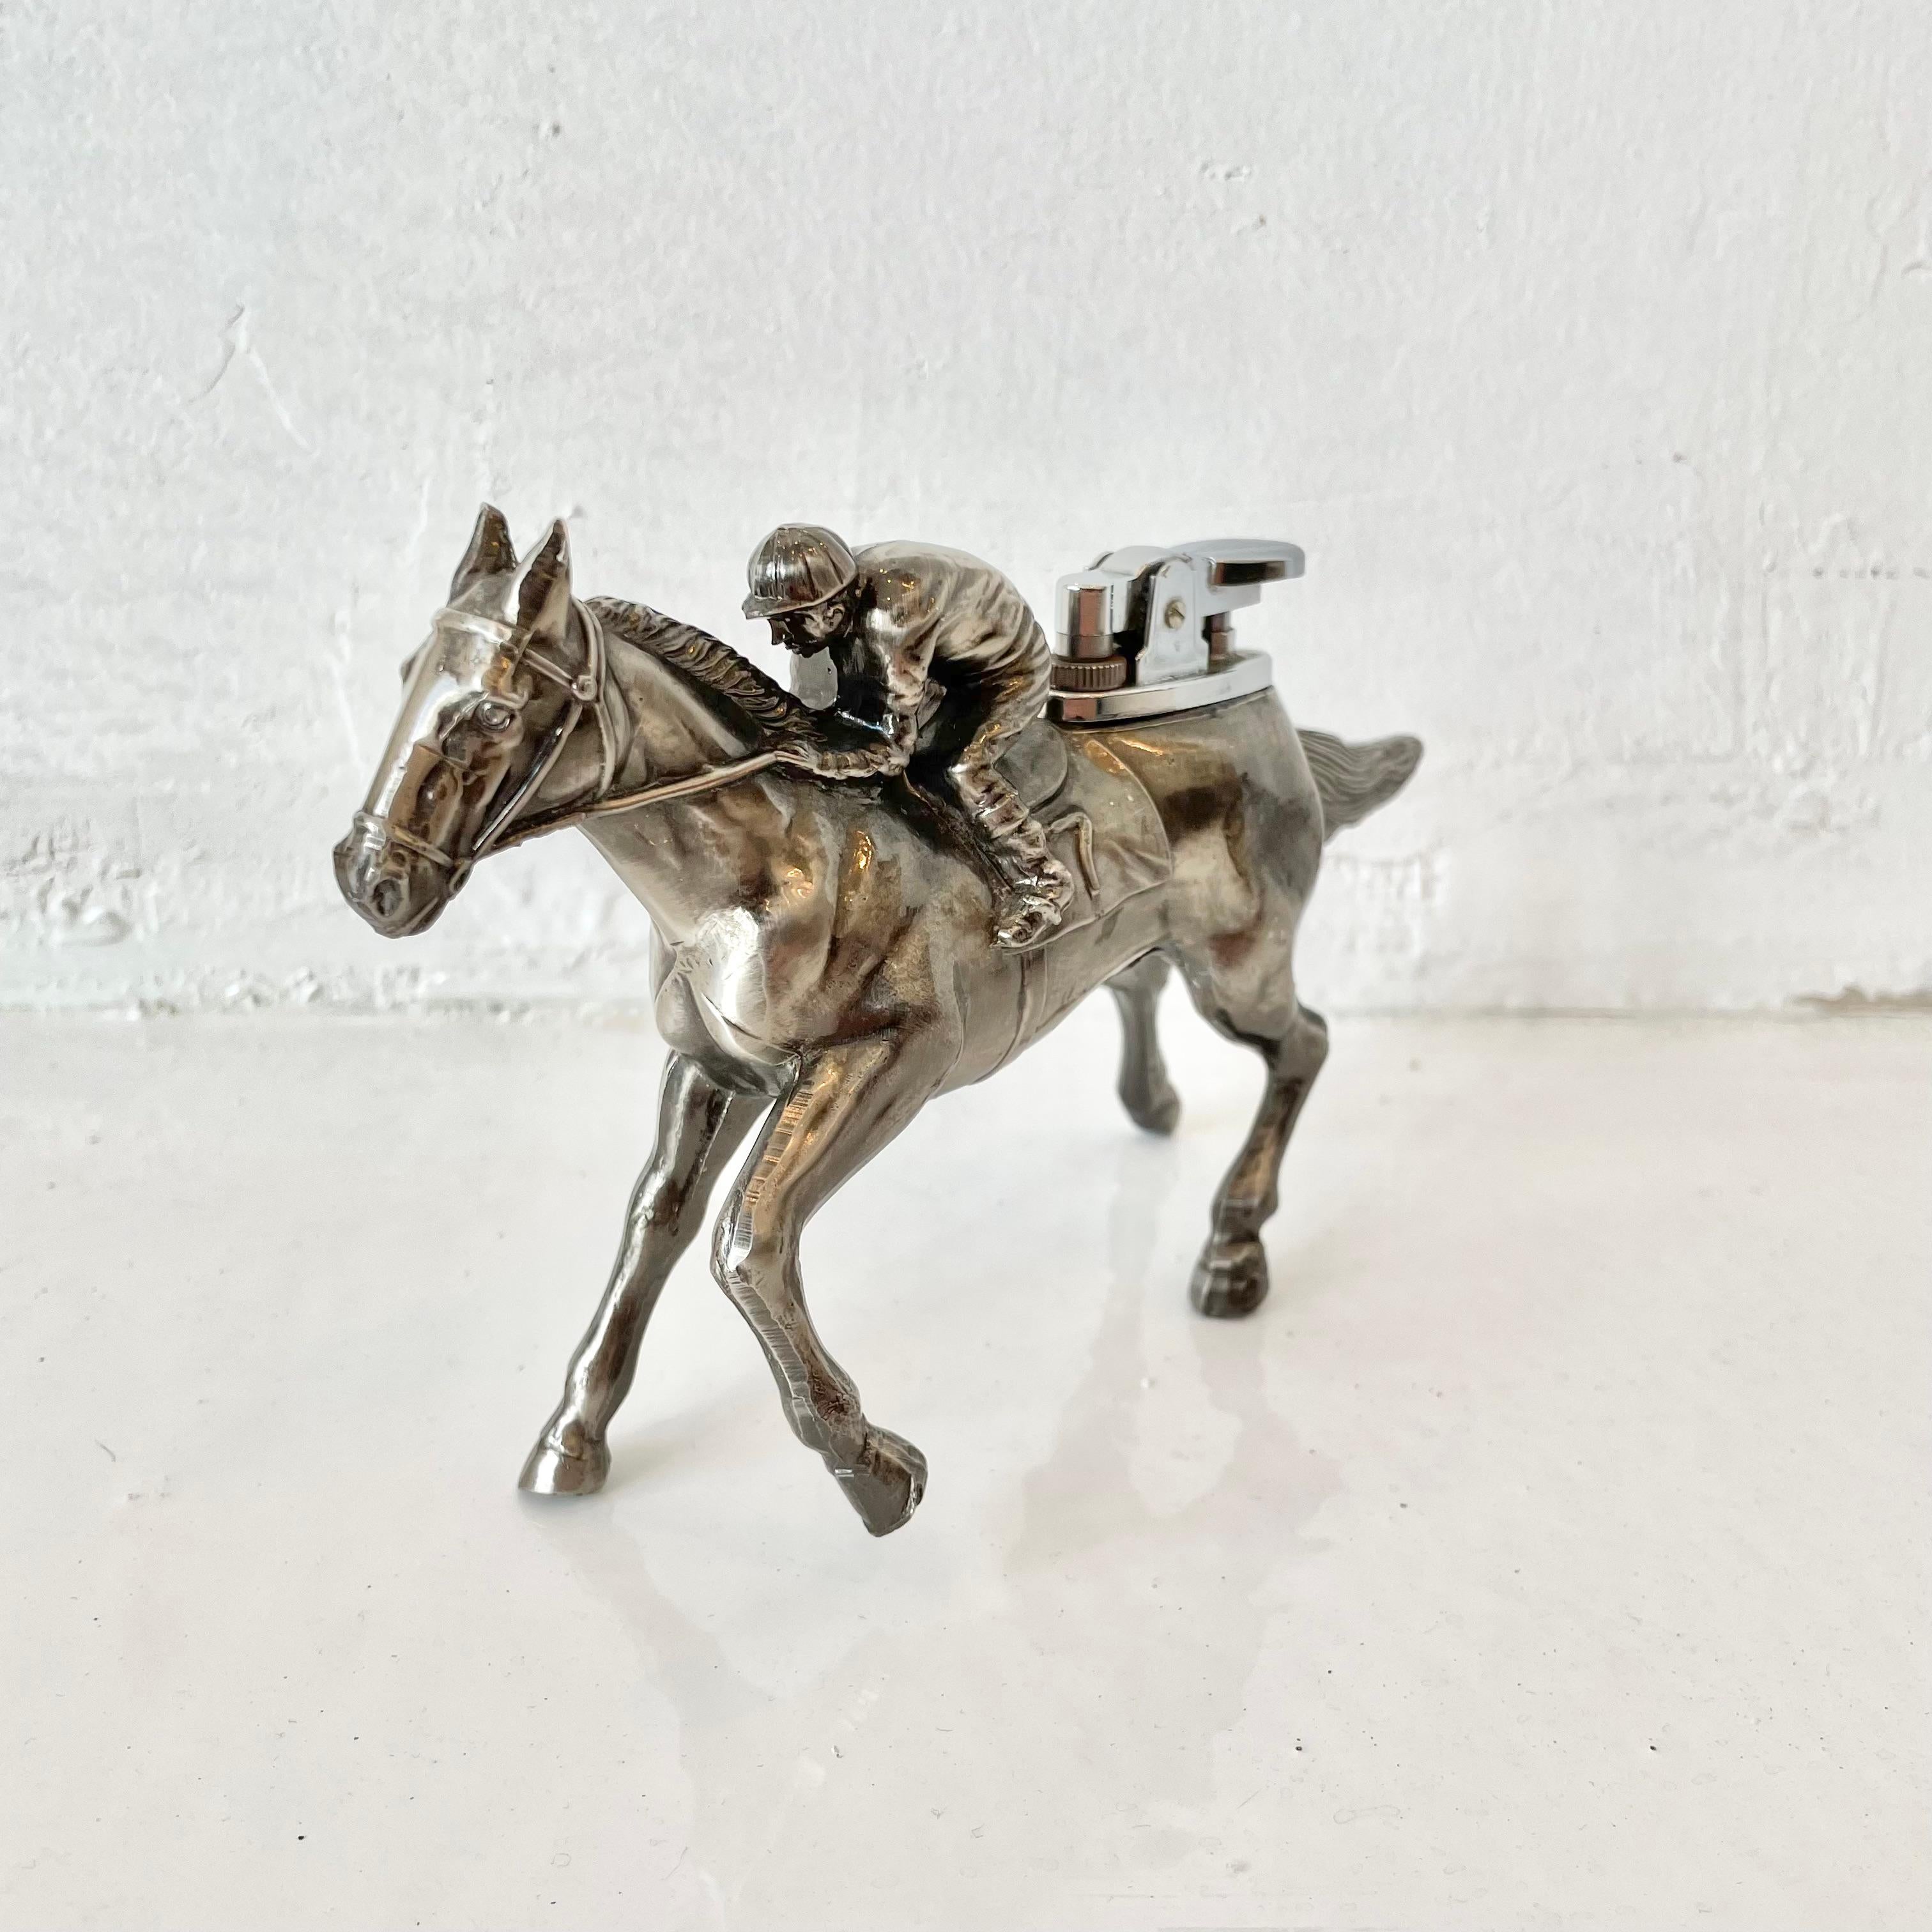 Whimsical vintage table lighter in the shape of a race horse and jockey. Made in Japan. Beautiful detail, heavy and substantial, helping it stand easily on its own. Cool tobacco accessory and conversation piece. Working lighter. Great vintage